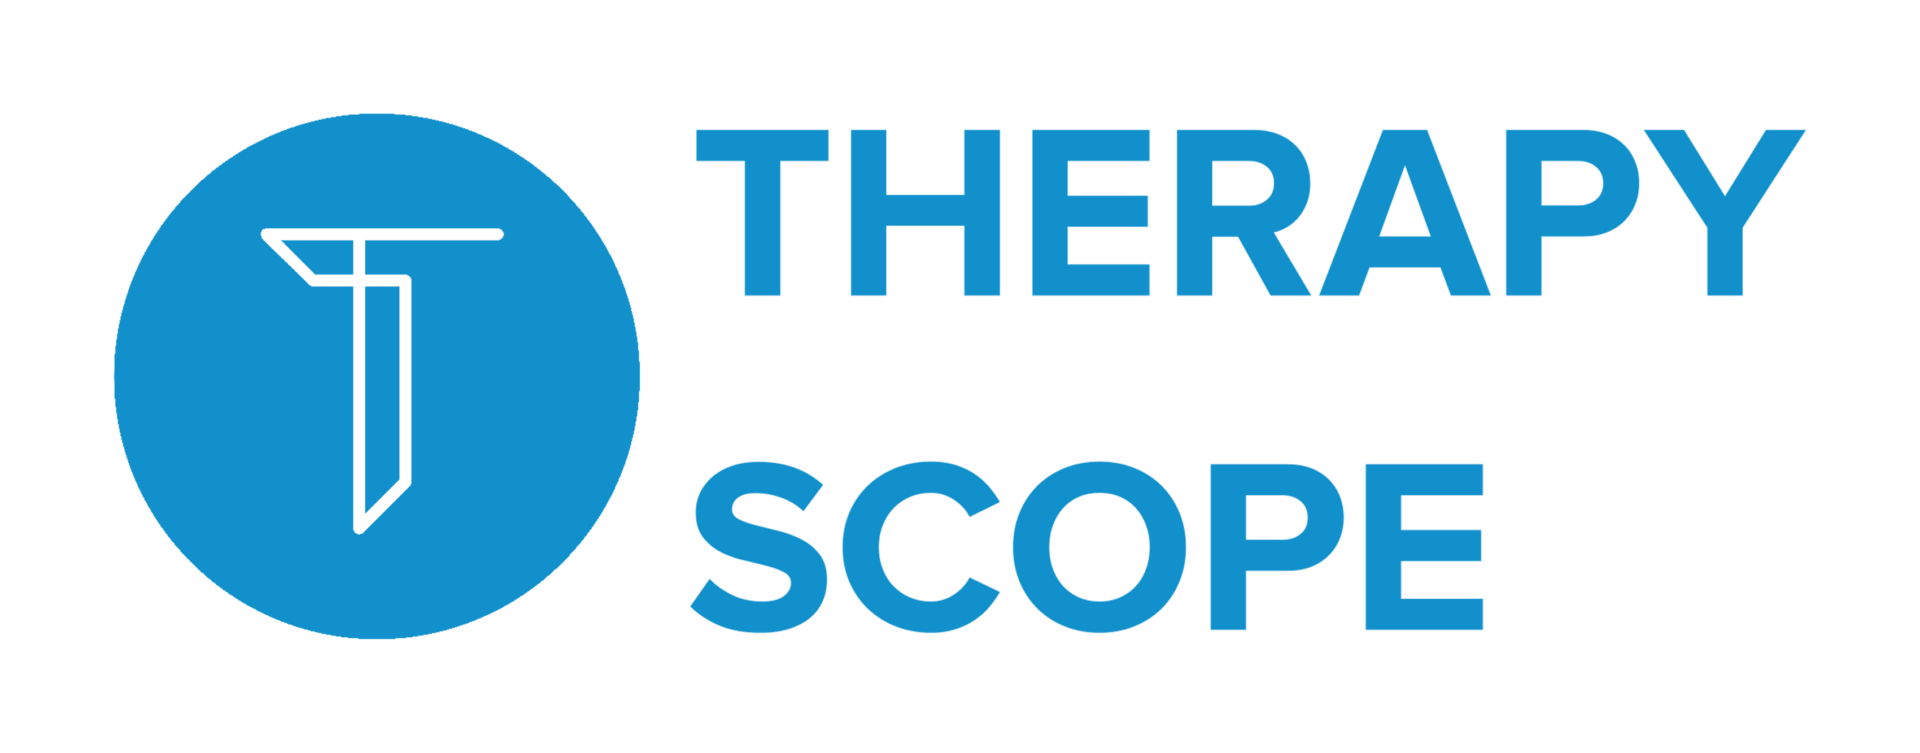 Therapy Scope